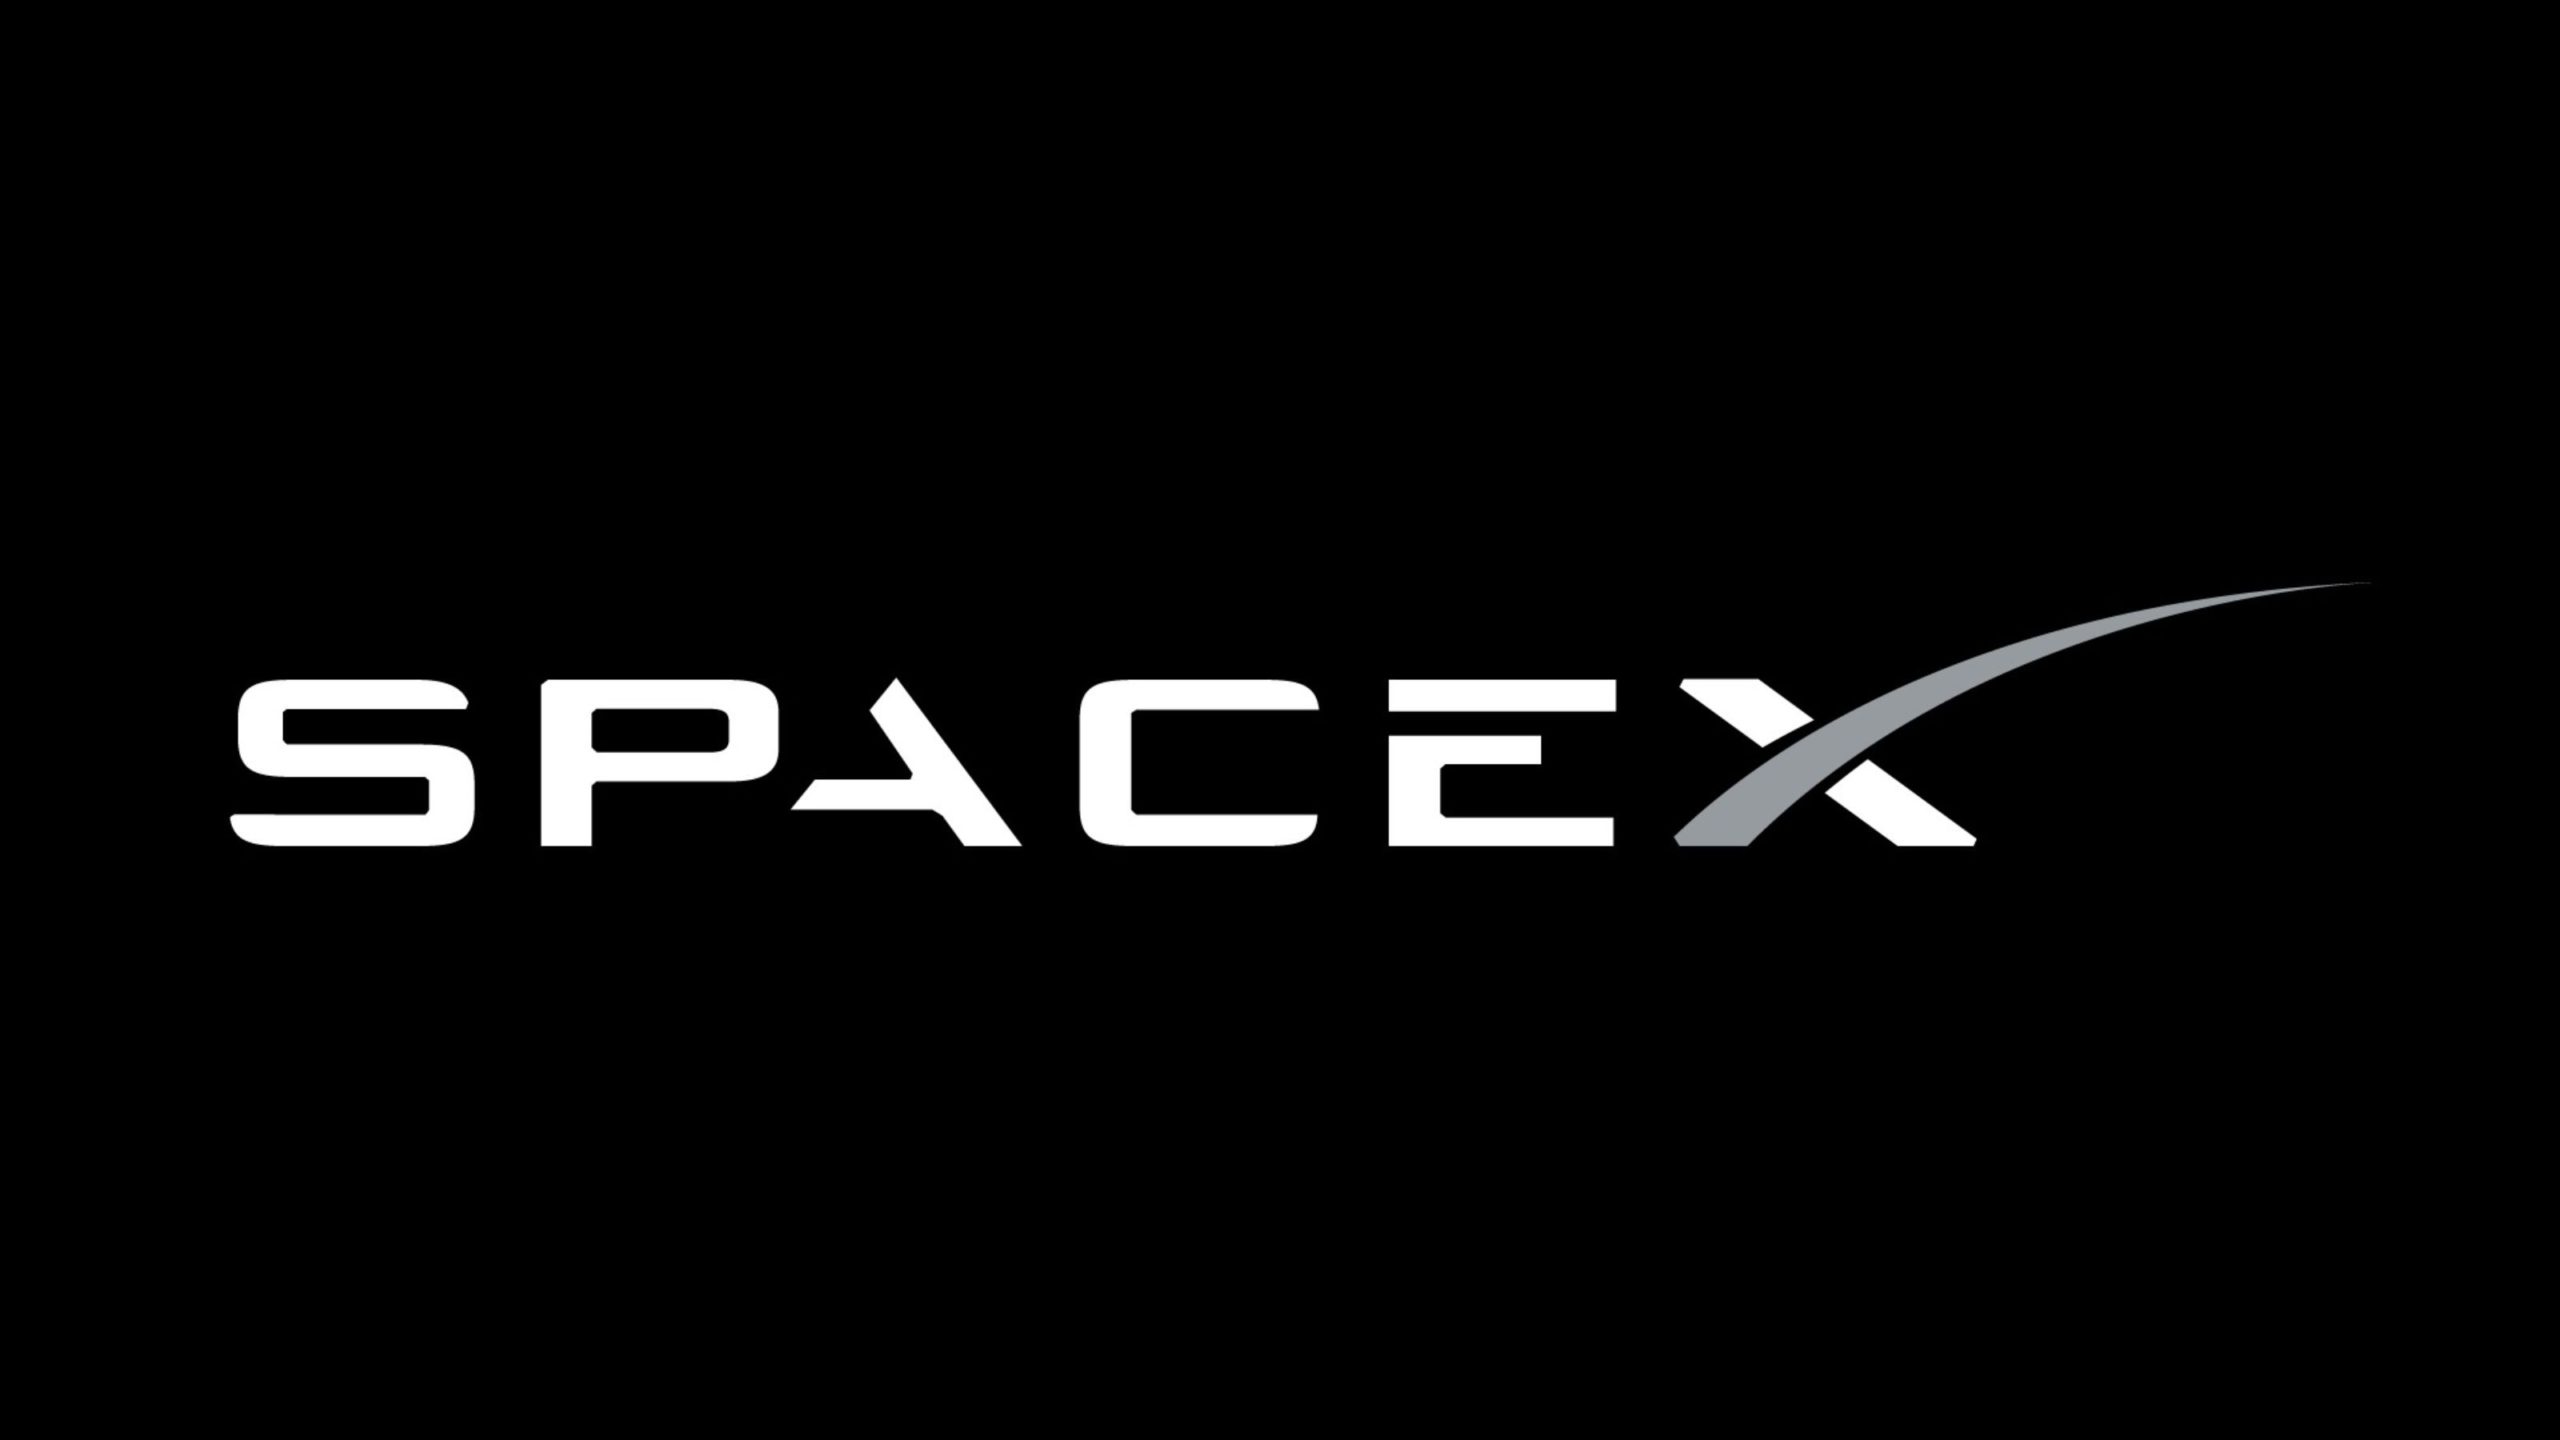 SpaceX Raises $1.9 Billion in Latest Round of Funding